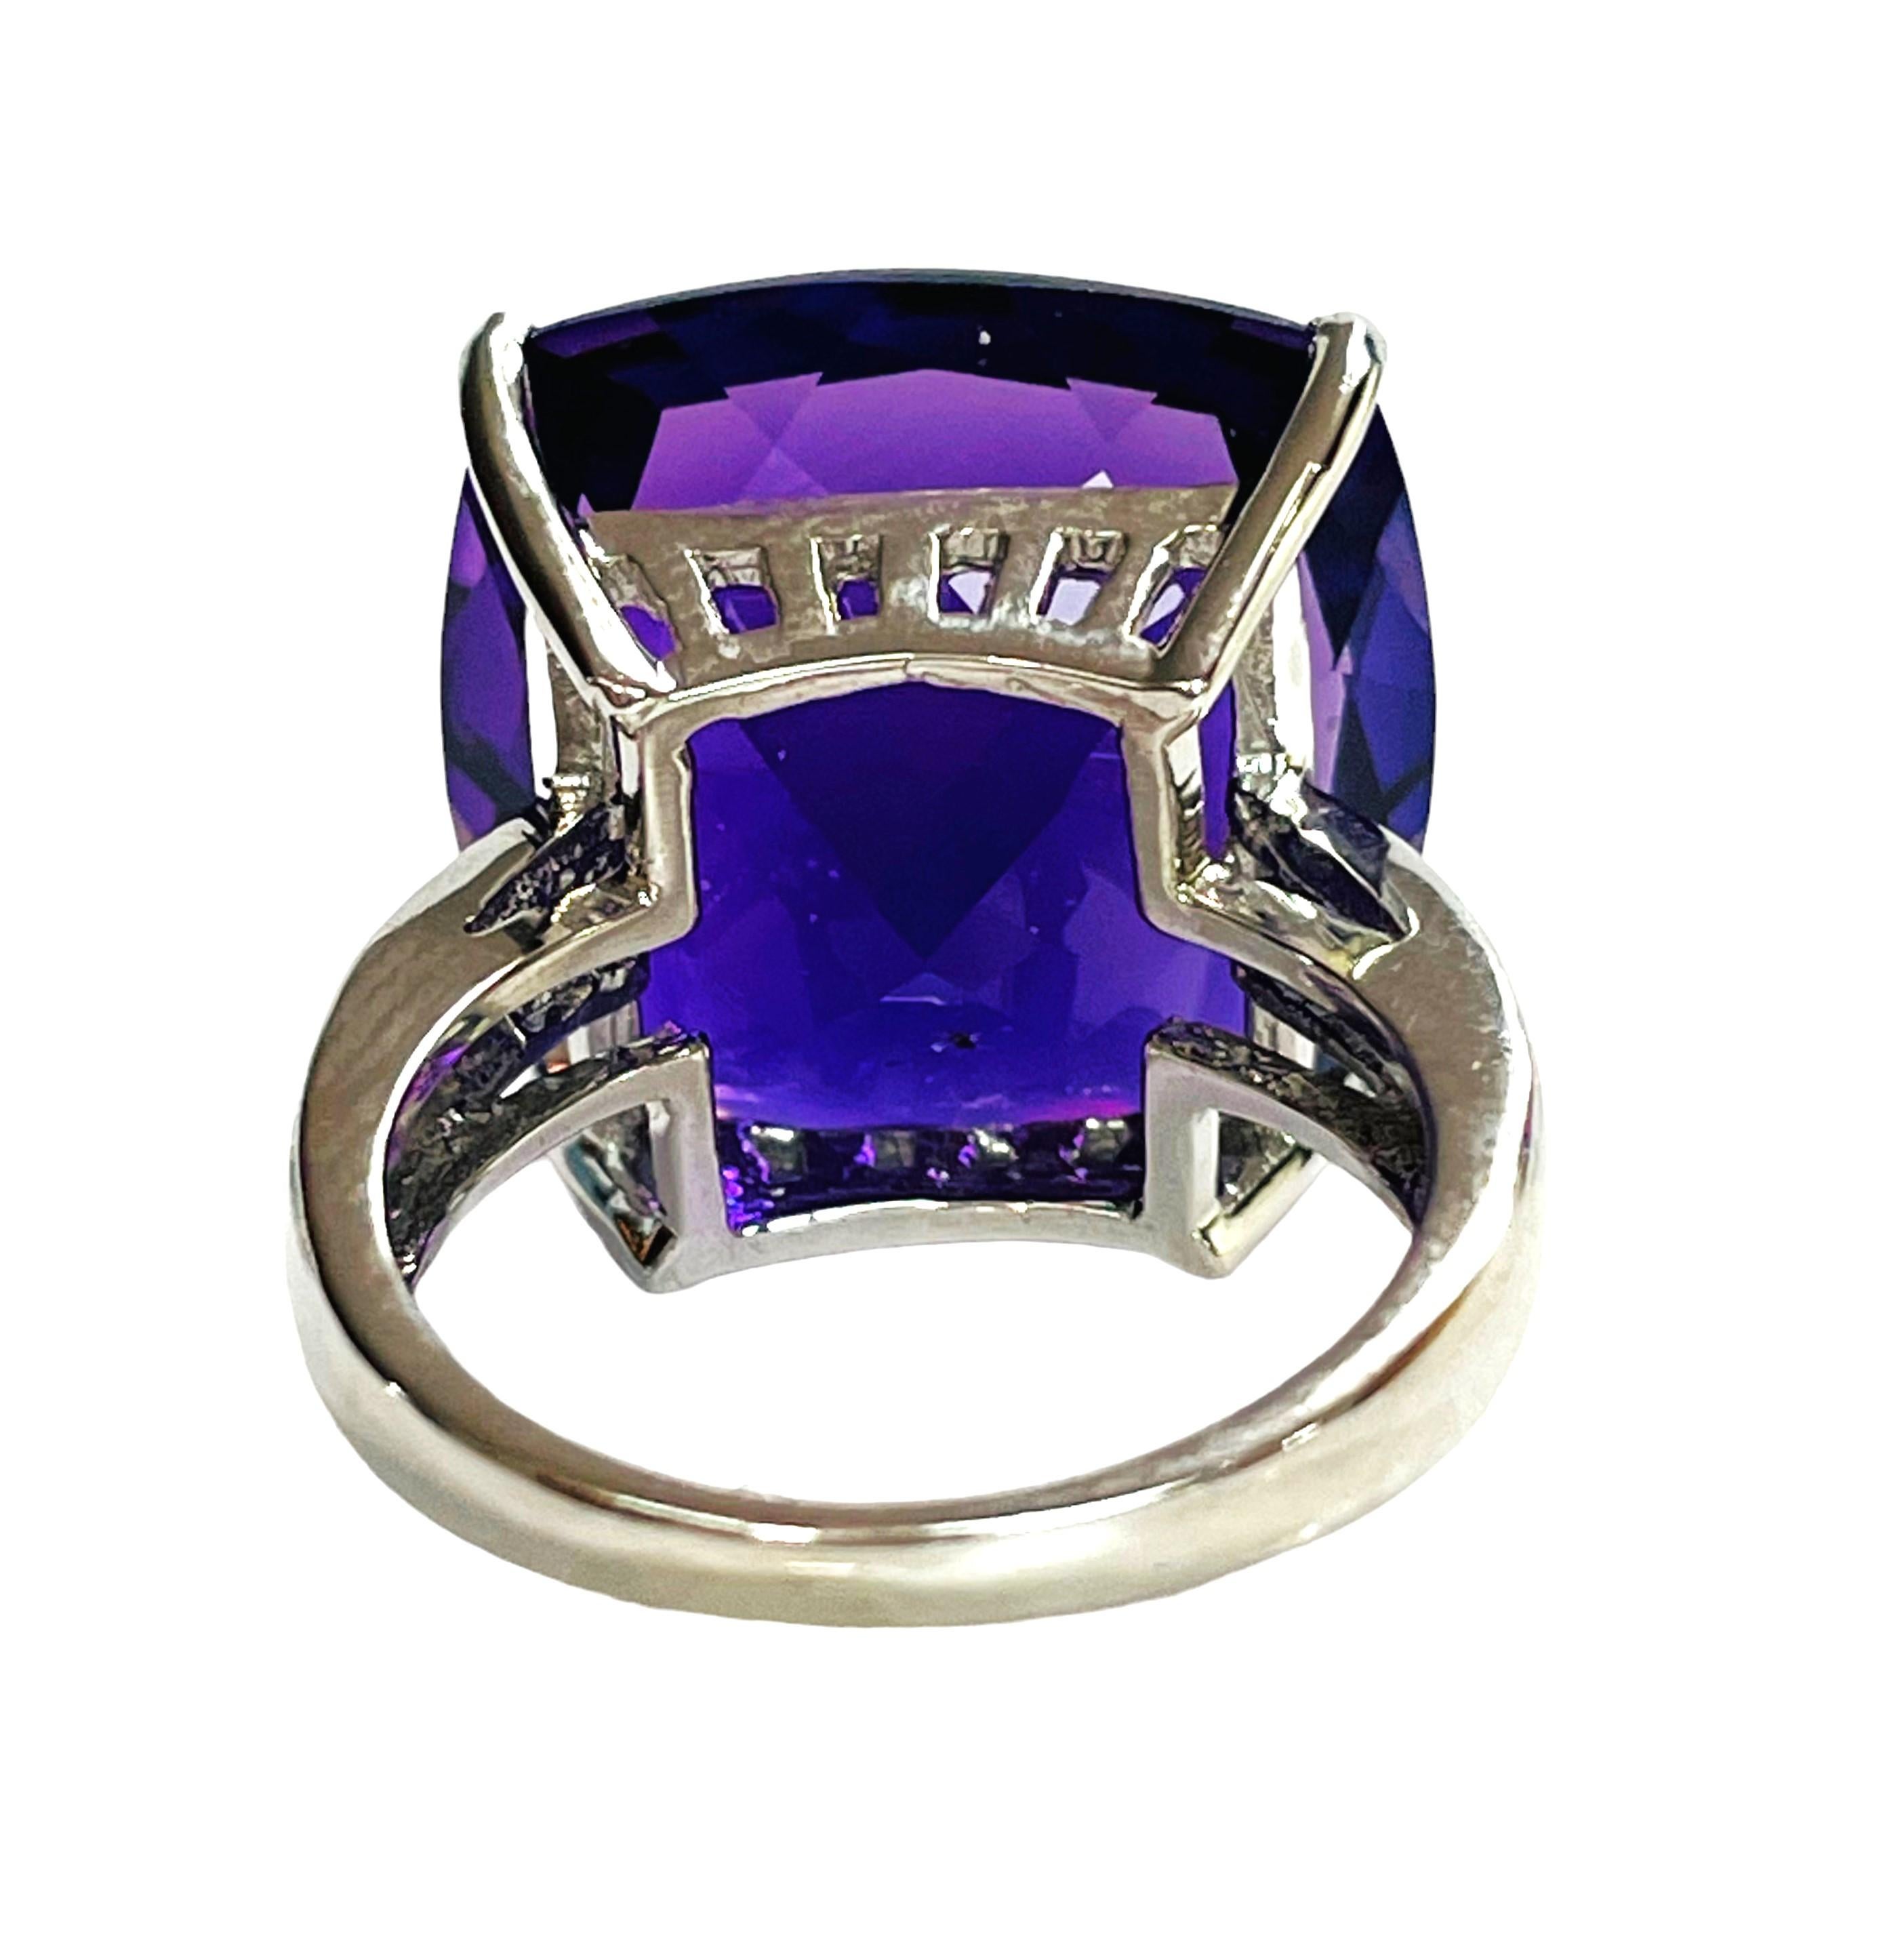 Antique Cushion Cut New Brazilian Color Changing Purple Blue 22.8 Ct Amethyst Sterling Ring